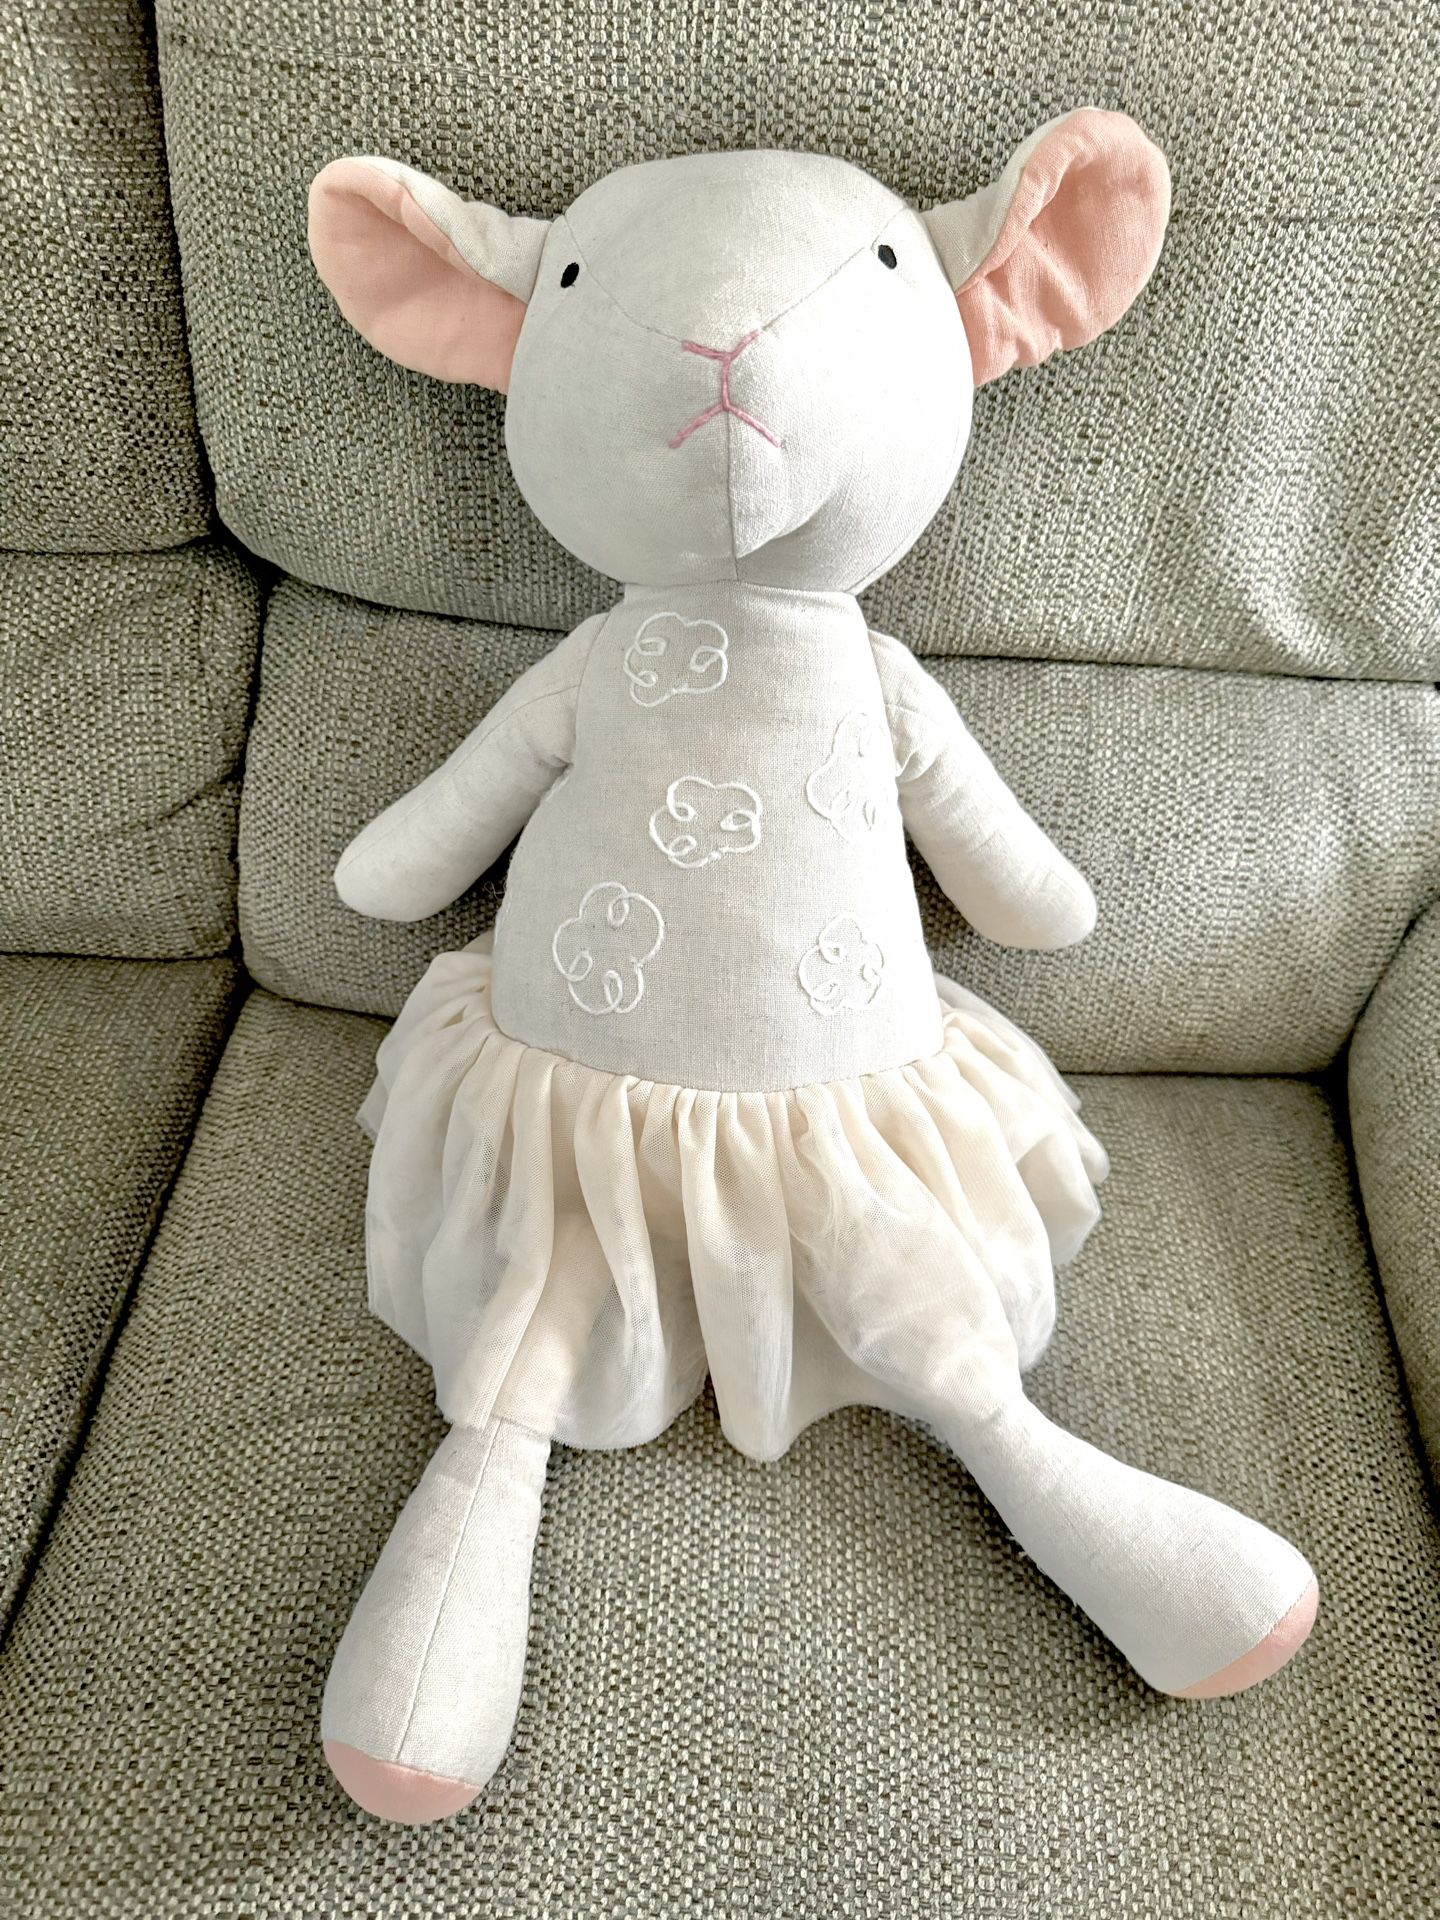 Super Cute large plush Ballerina Mouse with Tutu. Linen Material, high quality.  See all info BELOW!